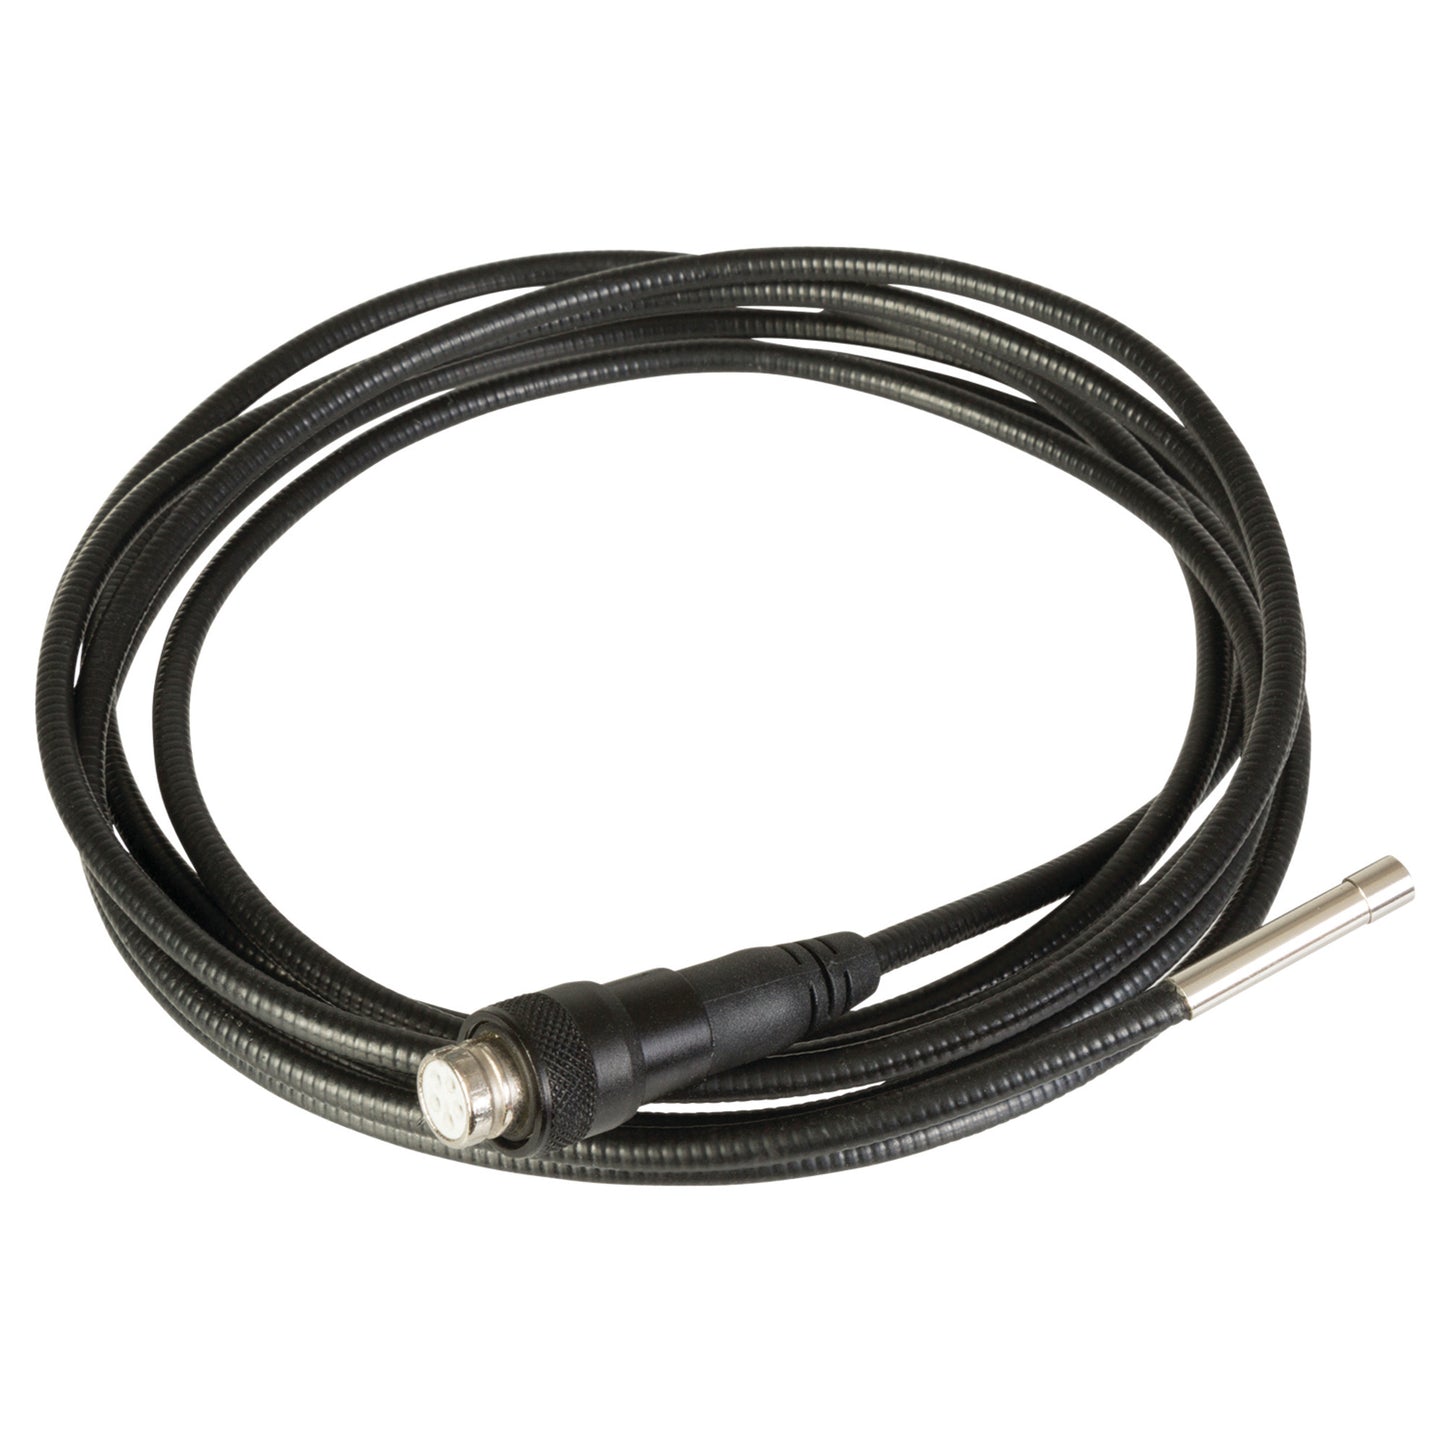 16-Foot x 8.5mm Camera Probe for Wi-Fi Video Inspection Scope